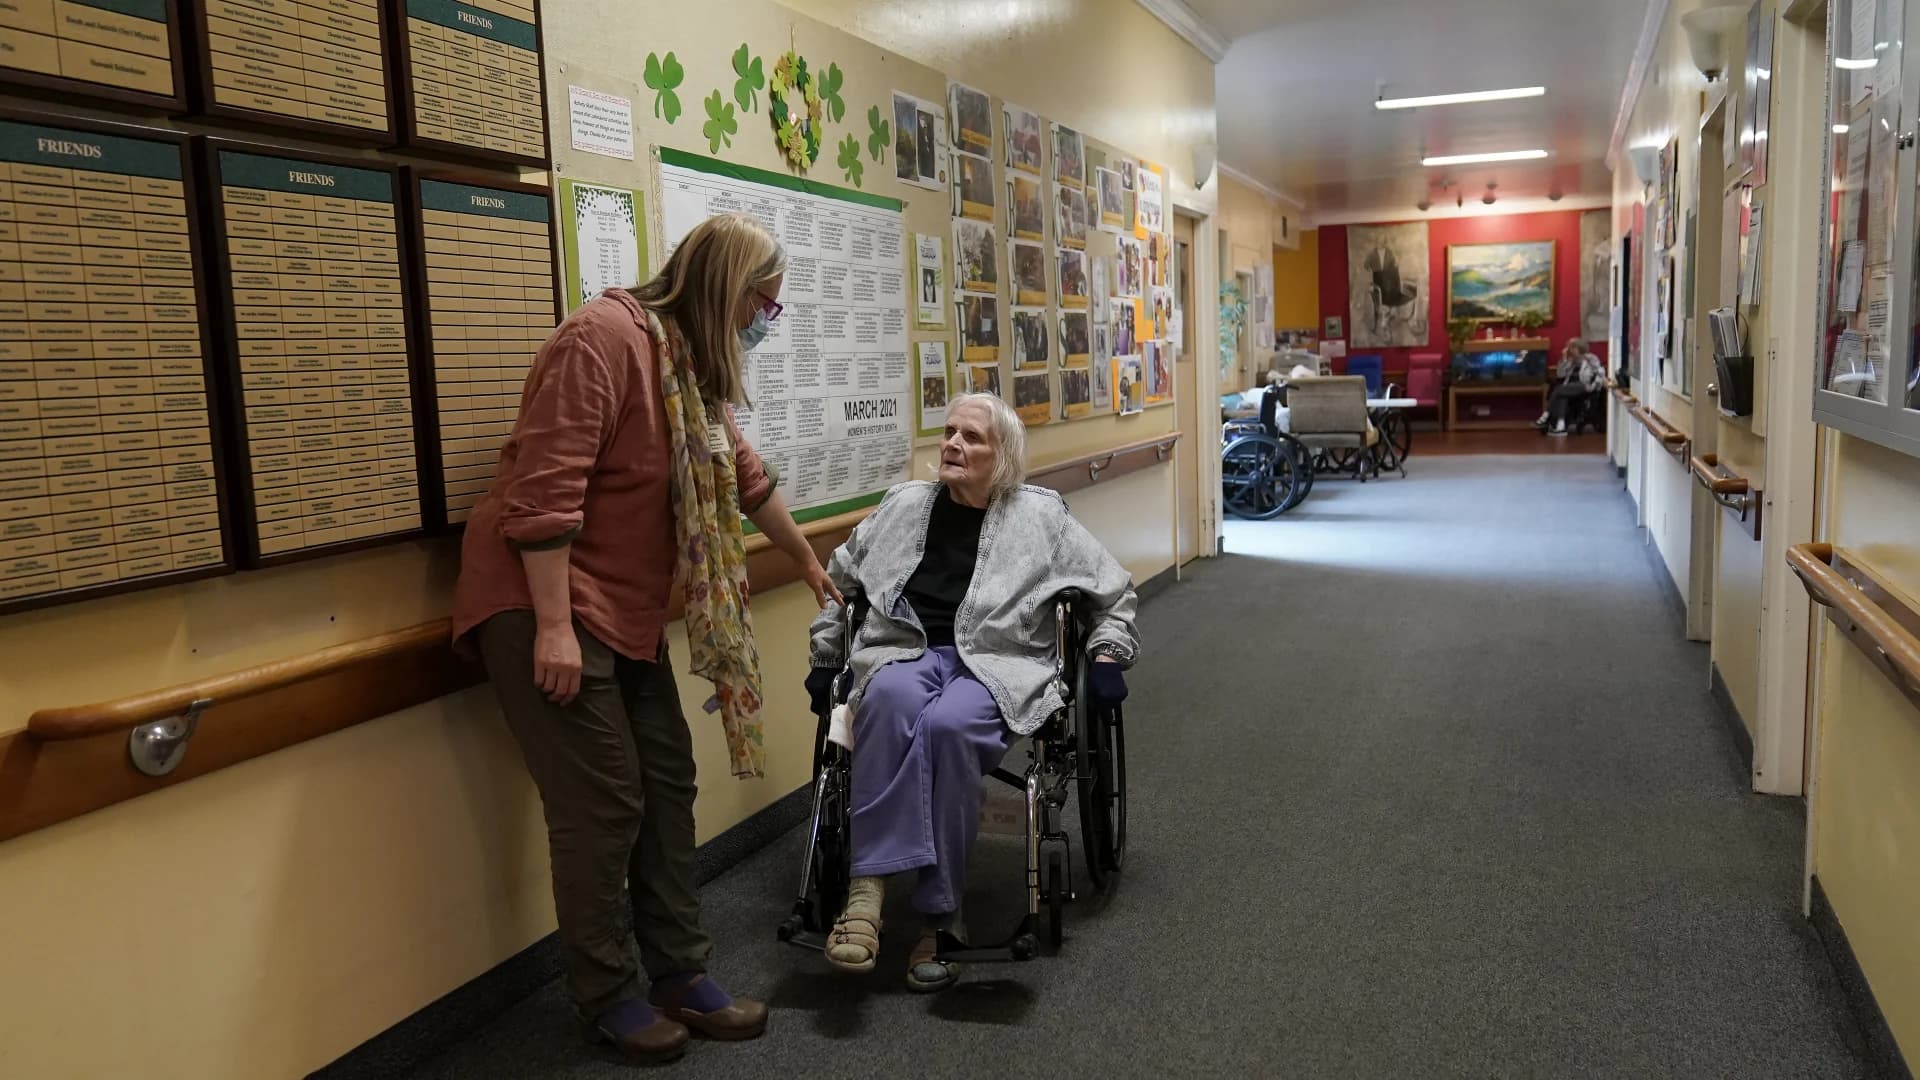 Gov. Cuomo announces new nursing home visitation guidance; 14-day period without cases scrapped